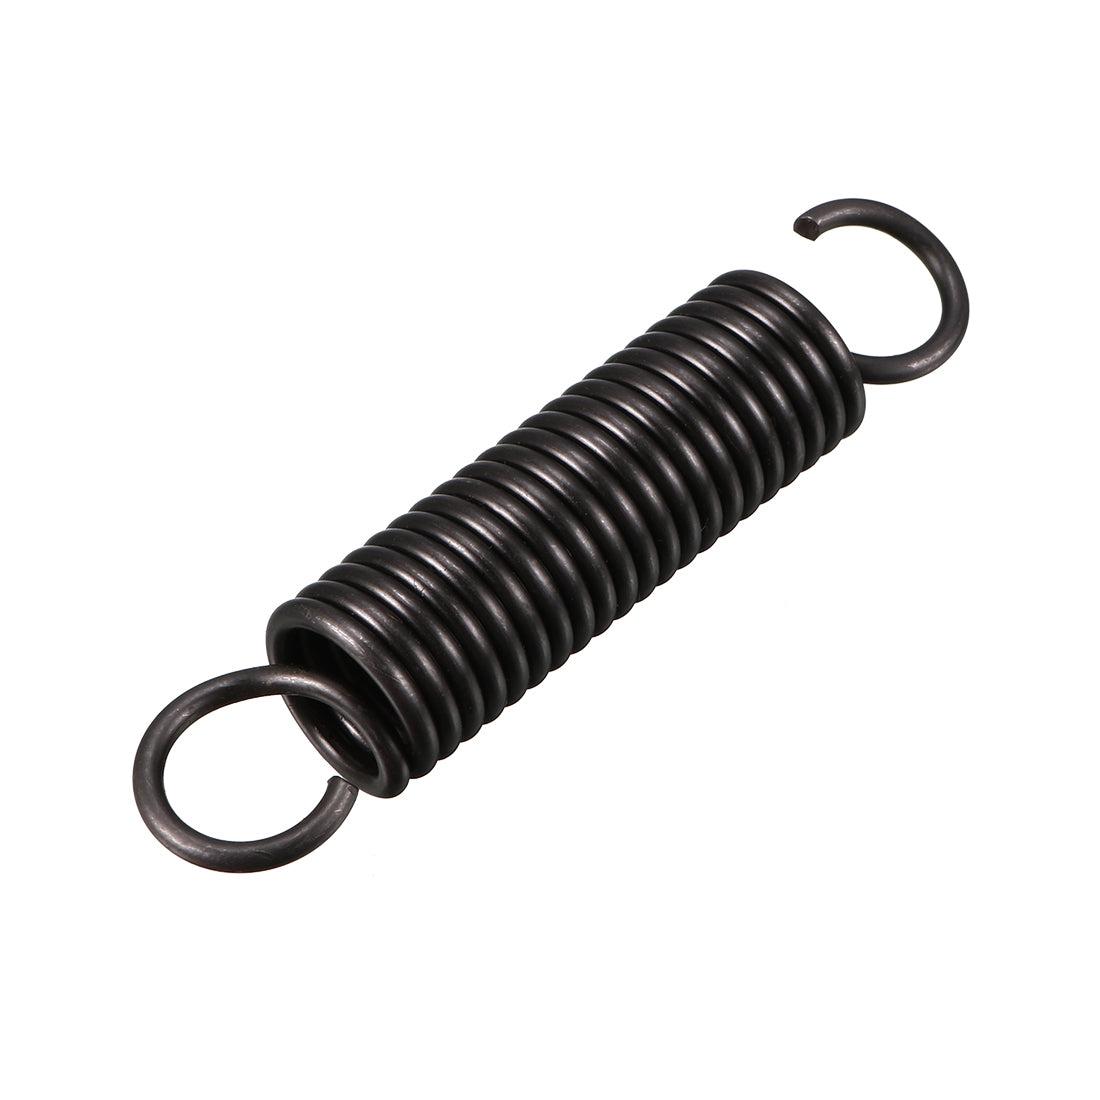 Uxcell Uxcell 2.5mm Wire Diax18mm ODx115mm Free Length Spring Steel Tension Spring